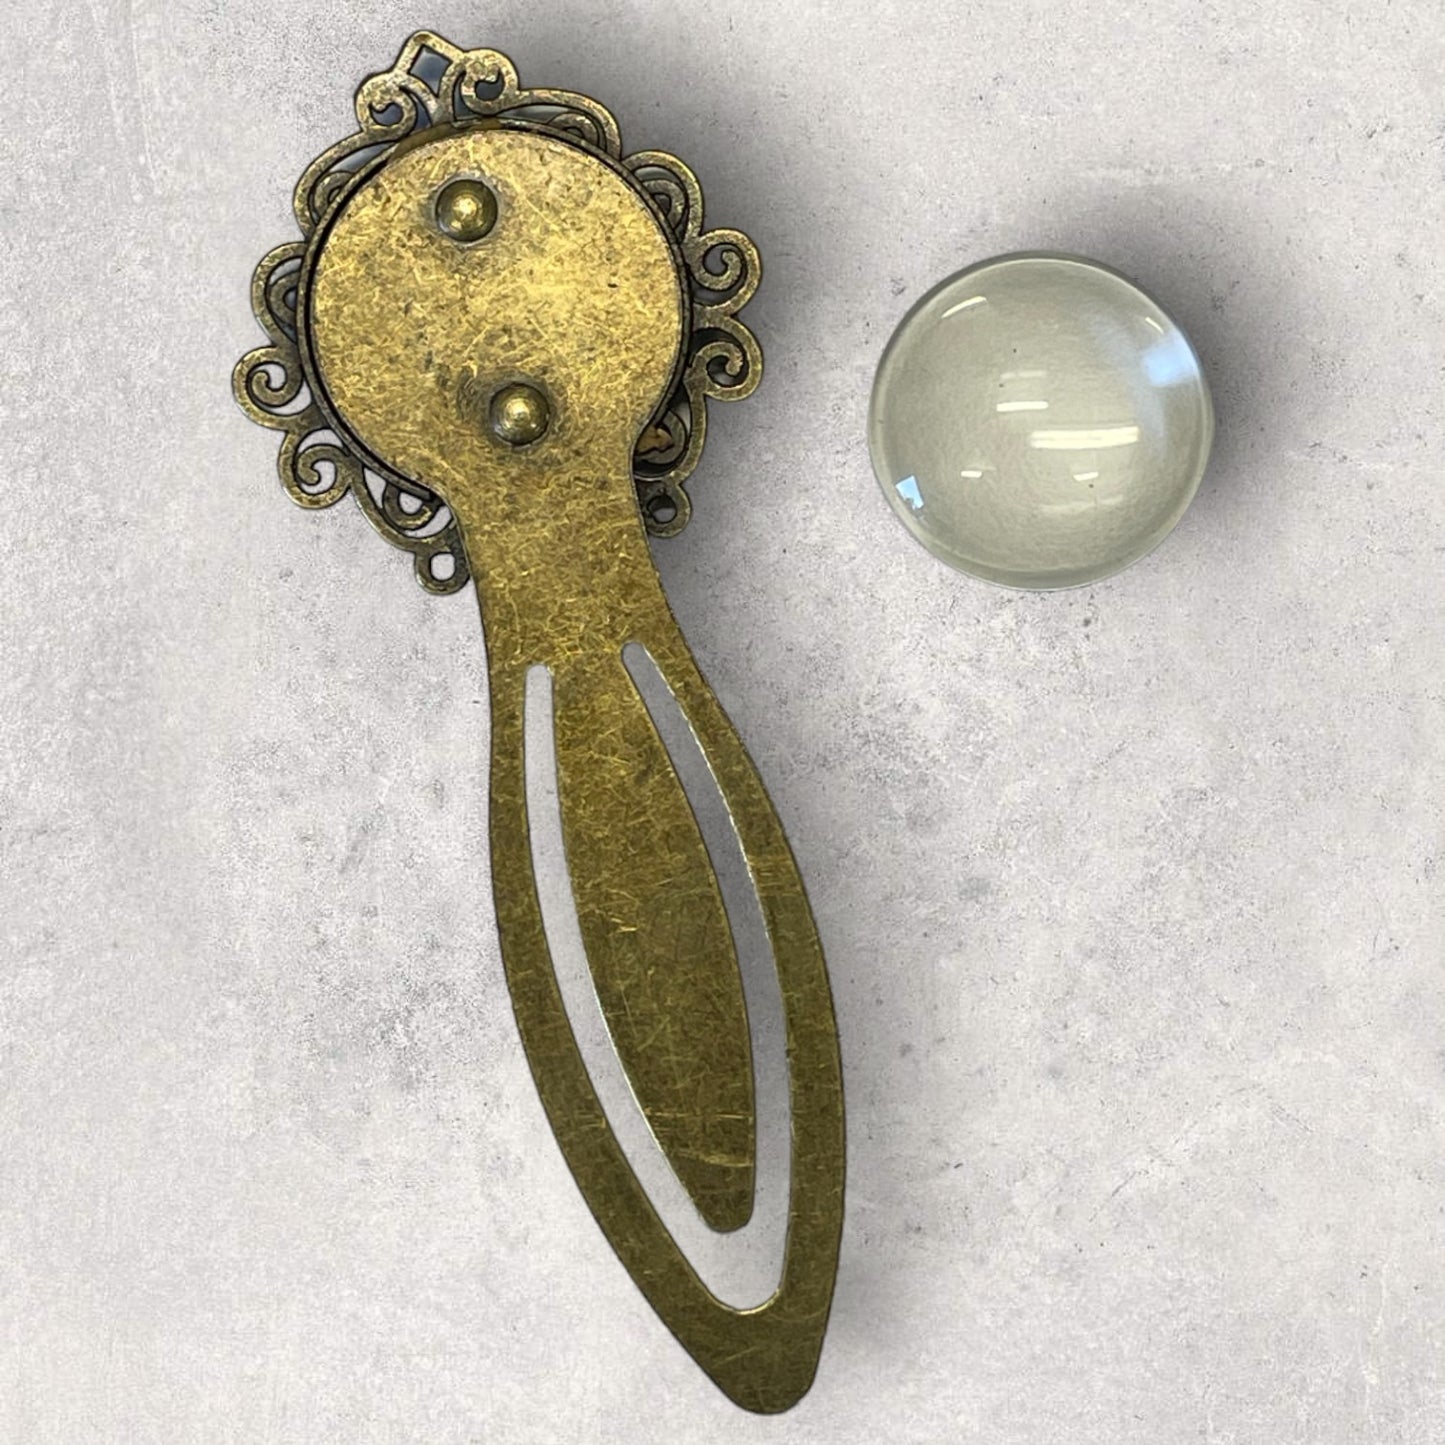 Bronze Bookmark Cabochon Base complete with 20mm glass dome insert - 1 set